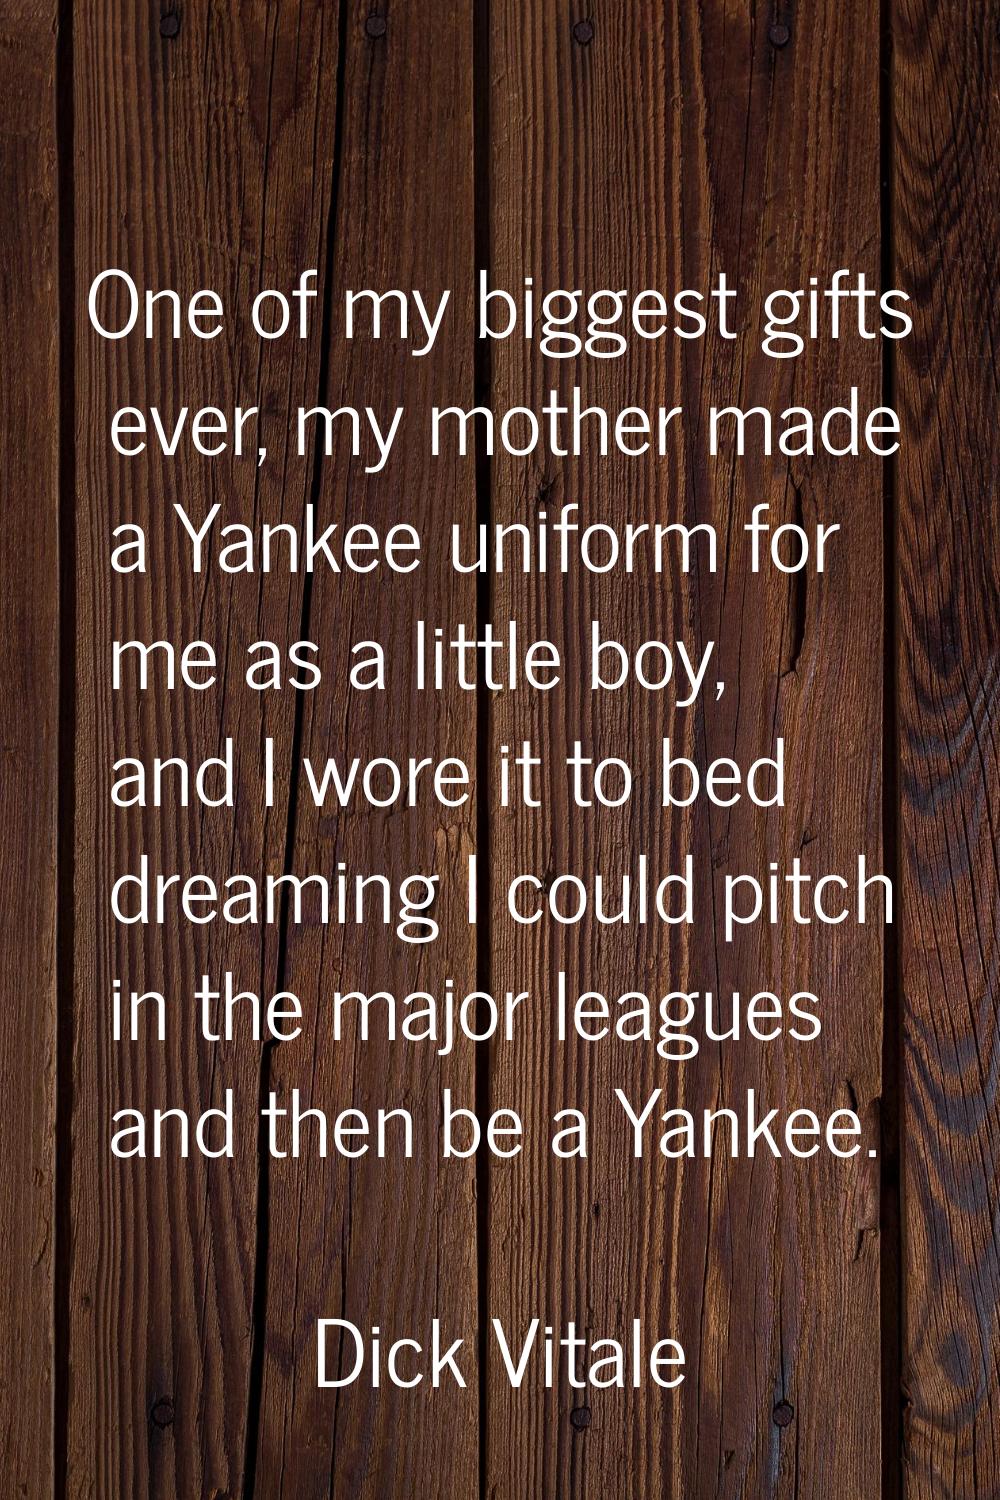 One of my biggest gifts ever, my mother made a Yankee uniform for me as a little boy, and I wore it